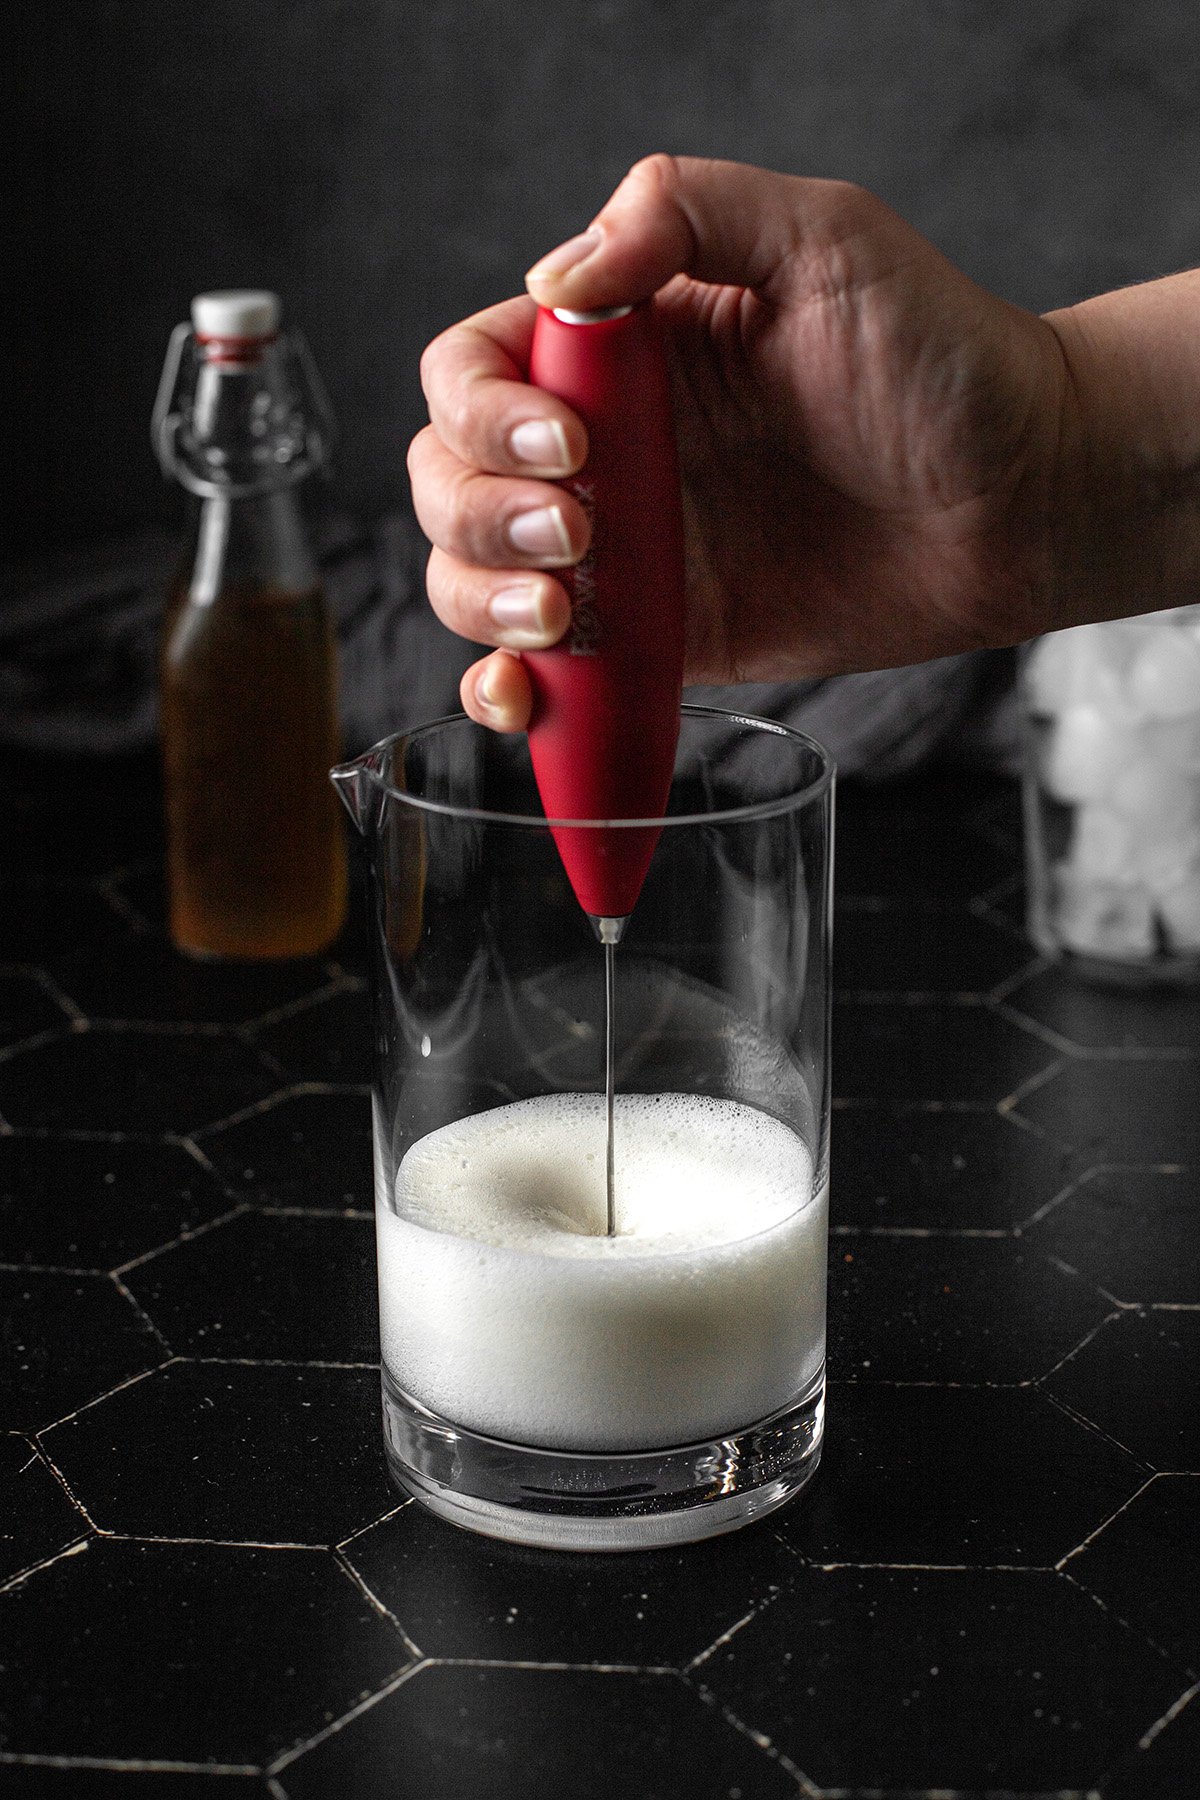 a hand milk frother whipping up milk in a glass container